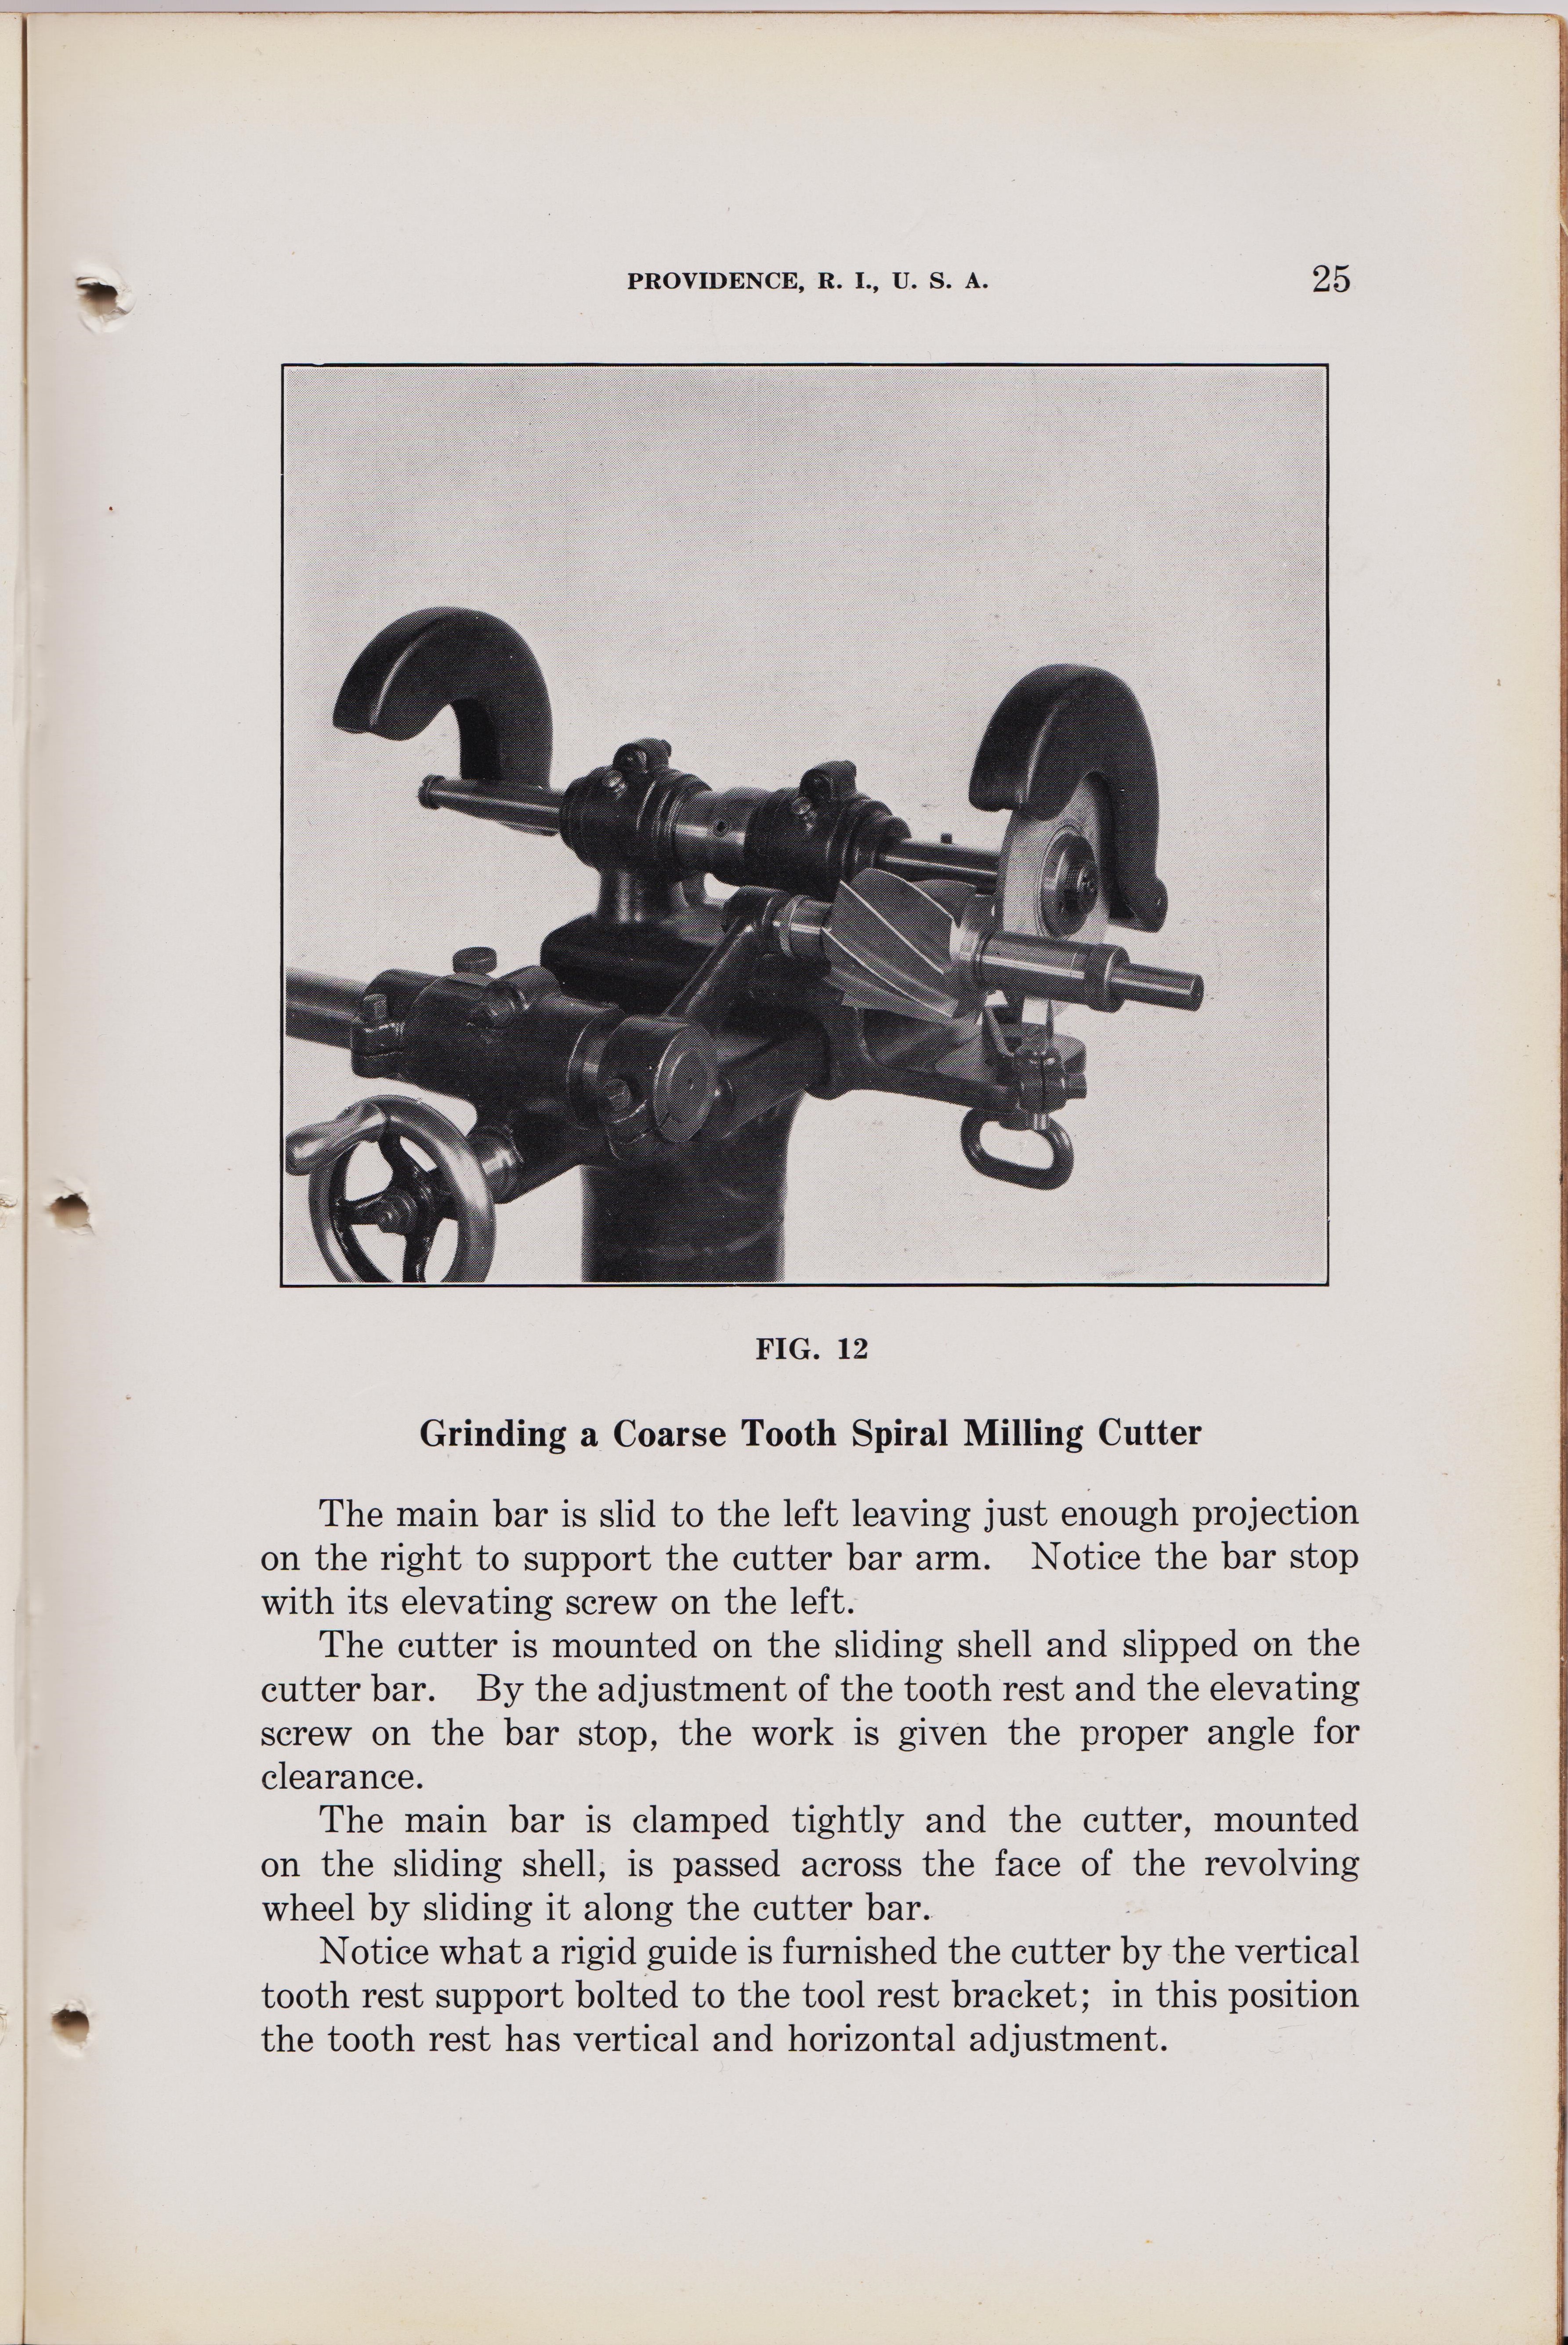 https://antiquemachinery.com/images-2020/Universal-Cutter-and-Reamer-Grinder-Machine-Brown-and-Sharpe-Mfg-Co-1929-No2-pg-25.jpeg